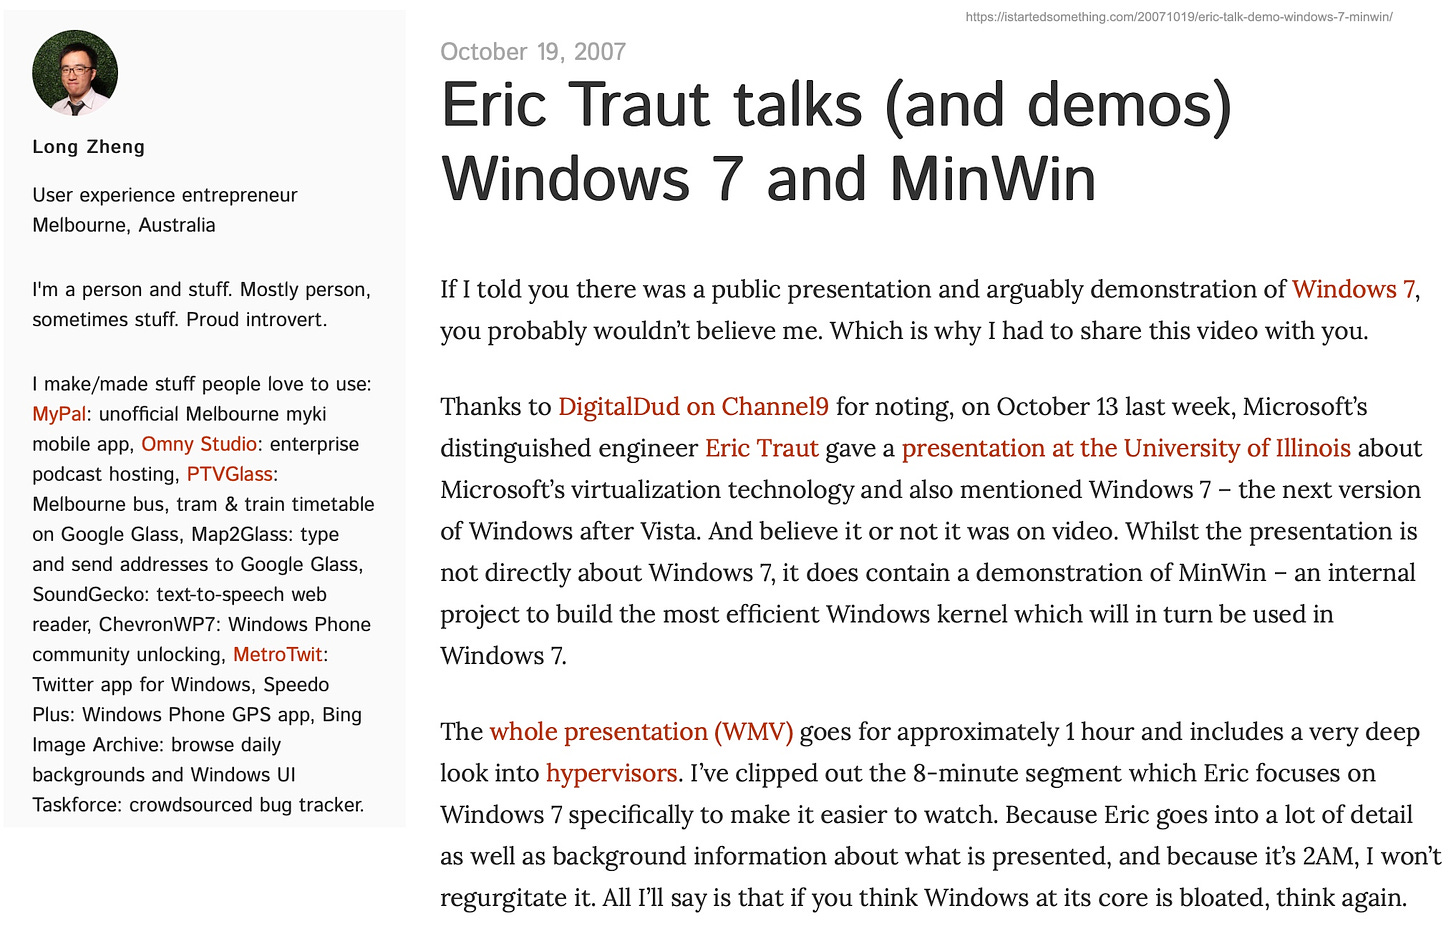 Eric Traut talks (and demos) Windows 7 and MinWin If I told you there was a public presentation and arguably demonstration of Windows 7, you probably wouldn't believe me. Which is why I had to share this video with you. Thanks to DigitalDud on Channel9 for noting, on October 13 last week, Microsoft's distinguished engineer Eric Traut gave a presentation at the University of Illinois about Microsoft's virtualization technology and also mentioned Windows 7 - the next version of Windows after Vista. And believe it or not it was on video. Whilst the presentation is not directly about Windows 7, it does contain a demonstration of MinWin - an internal project to build the most efficient Windows kernel which will in turn be used in Windows 7. The whole presentation (WMV) goes for approximately 1 hour and includes a very deep look into hypervisors. I've clipped out the 8-minute segment which Eric focuses on Windows 7 specifically to make it easier to watch. Because Eric goes into a lot of detail as well as background information about what is presented, and because it's 2AM, I won't regurgitate it. All I'll say is that if you think Windows at its core is bloated, think again.